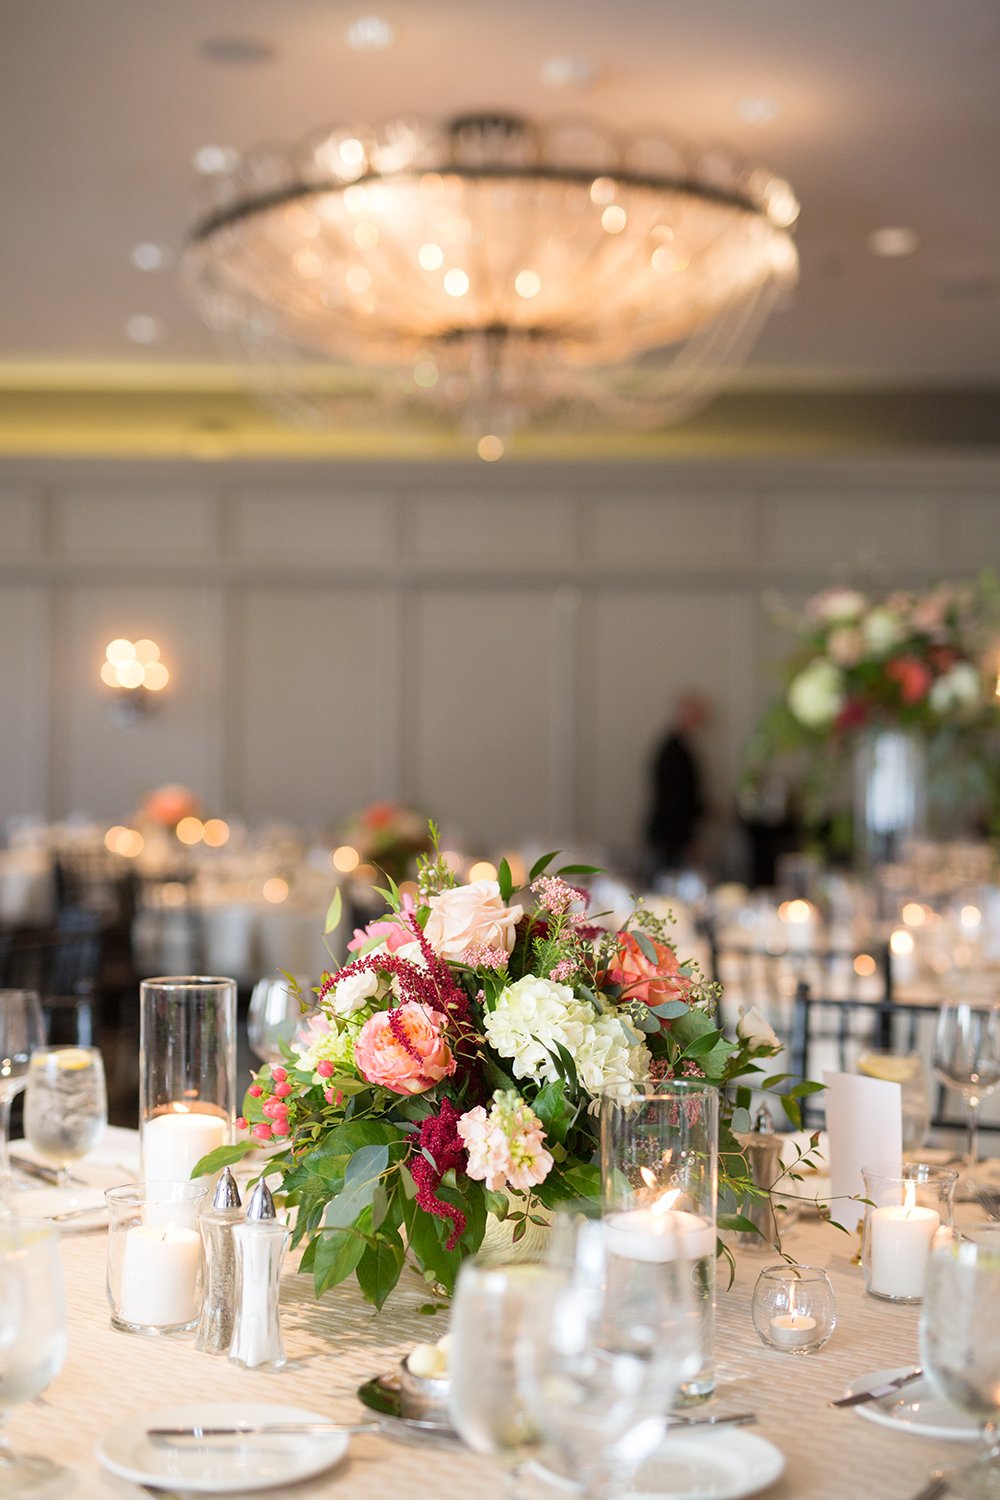 Neutrals, Pink, Coral, Burgundy reception centerpieces and decor - flowers